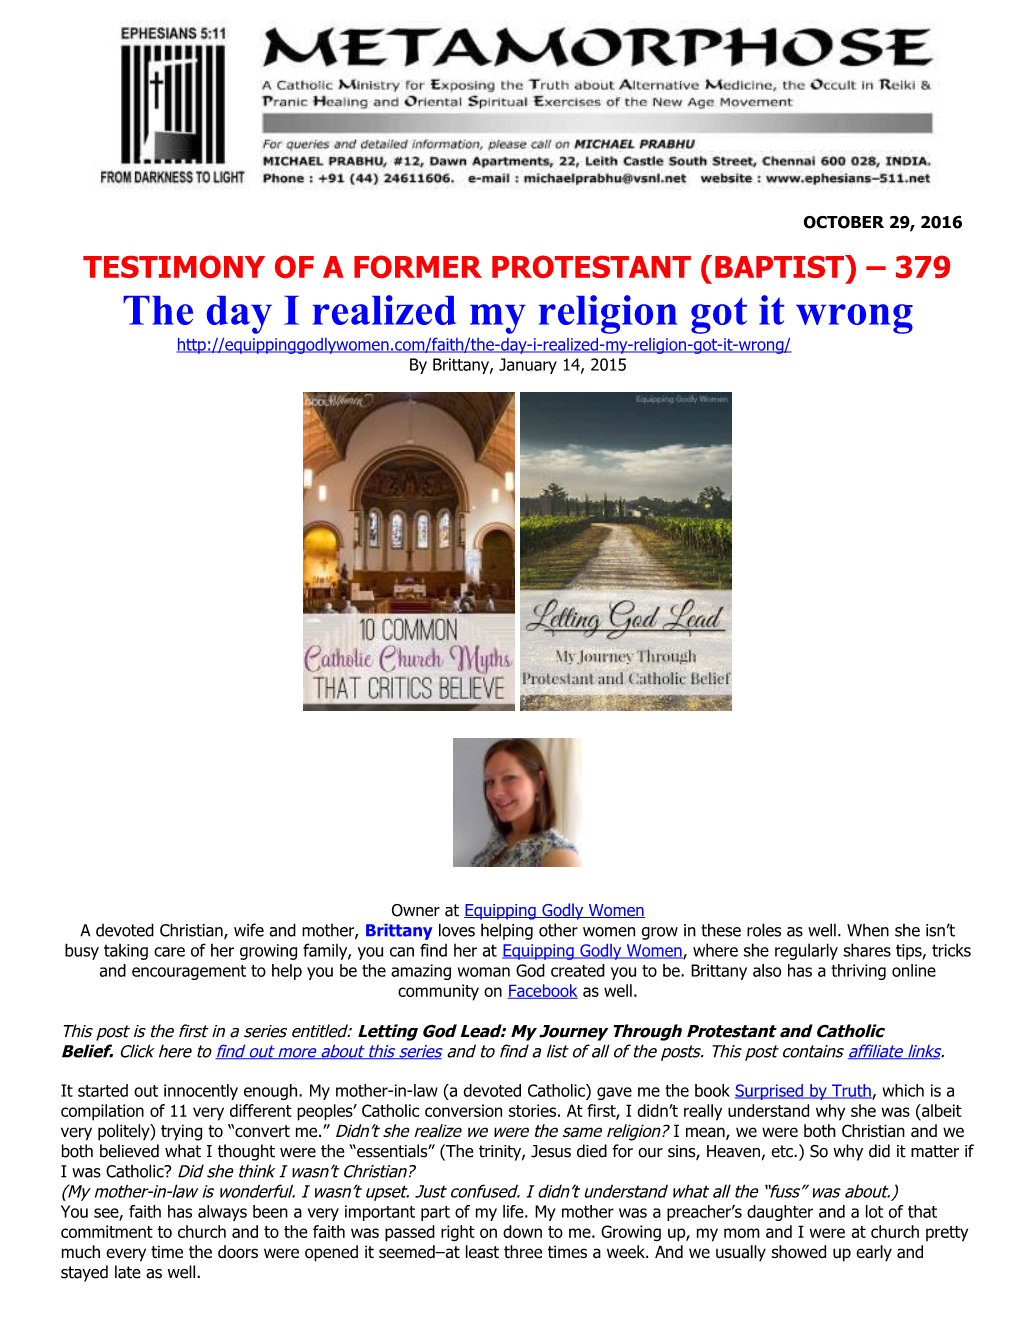 Testimony of a Former Protestant (Baptist) 379